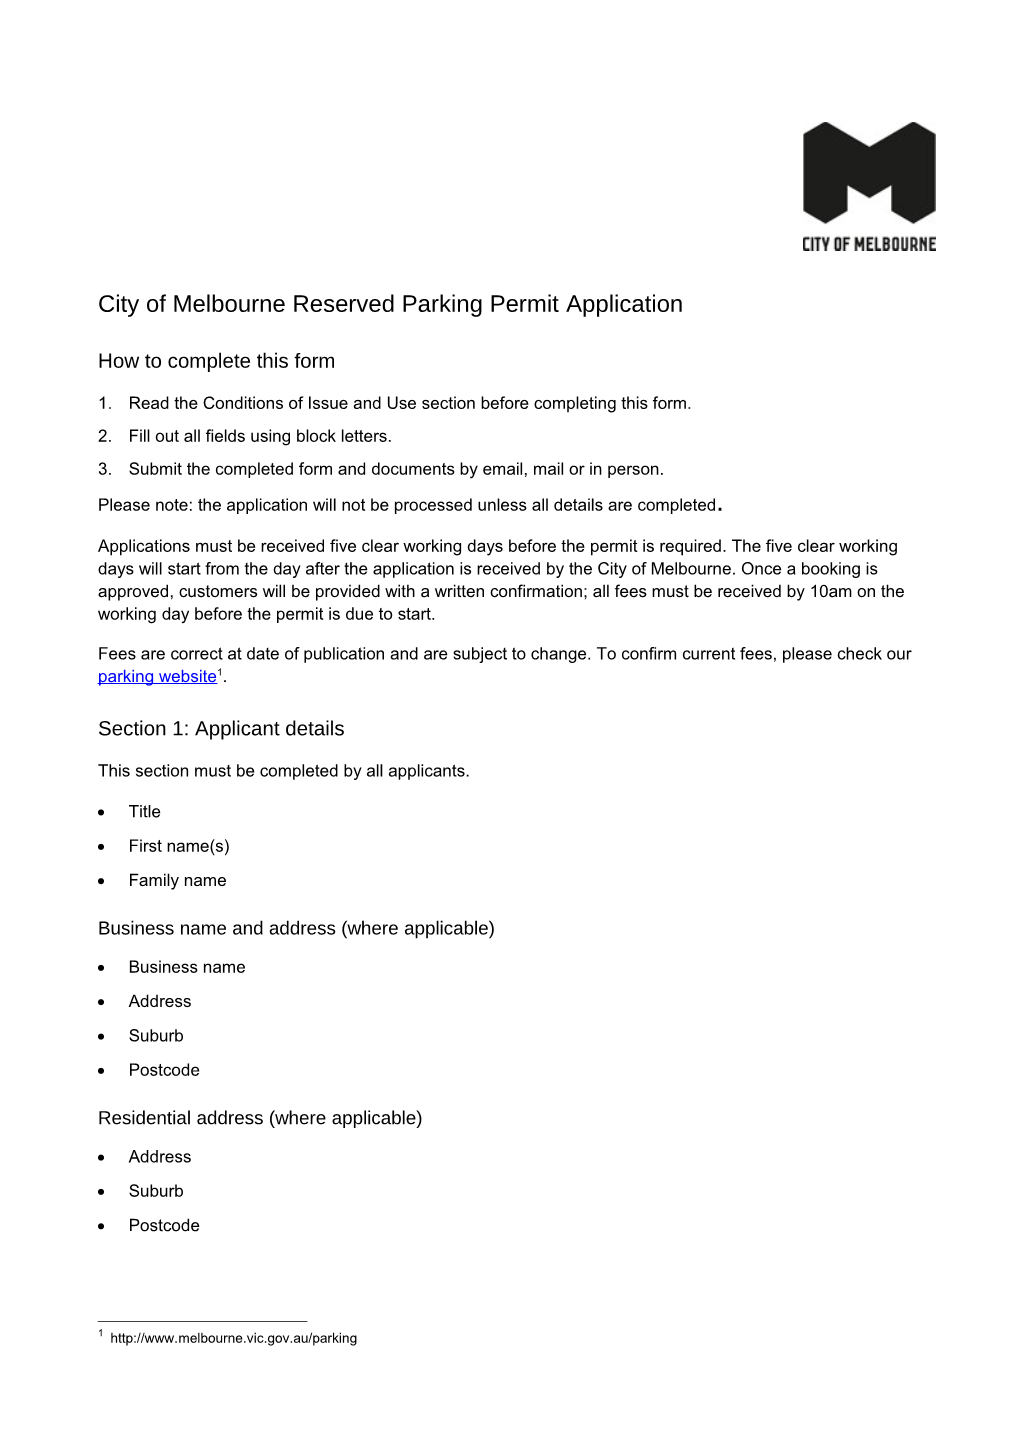 City of Melbourne Reserved Parking Permit Application